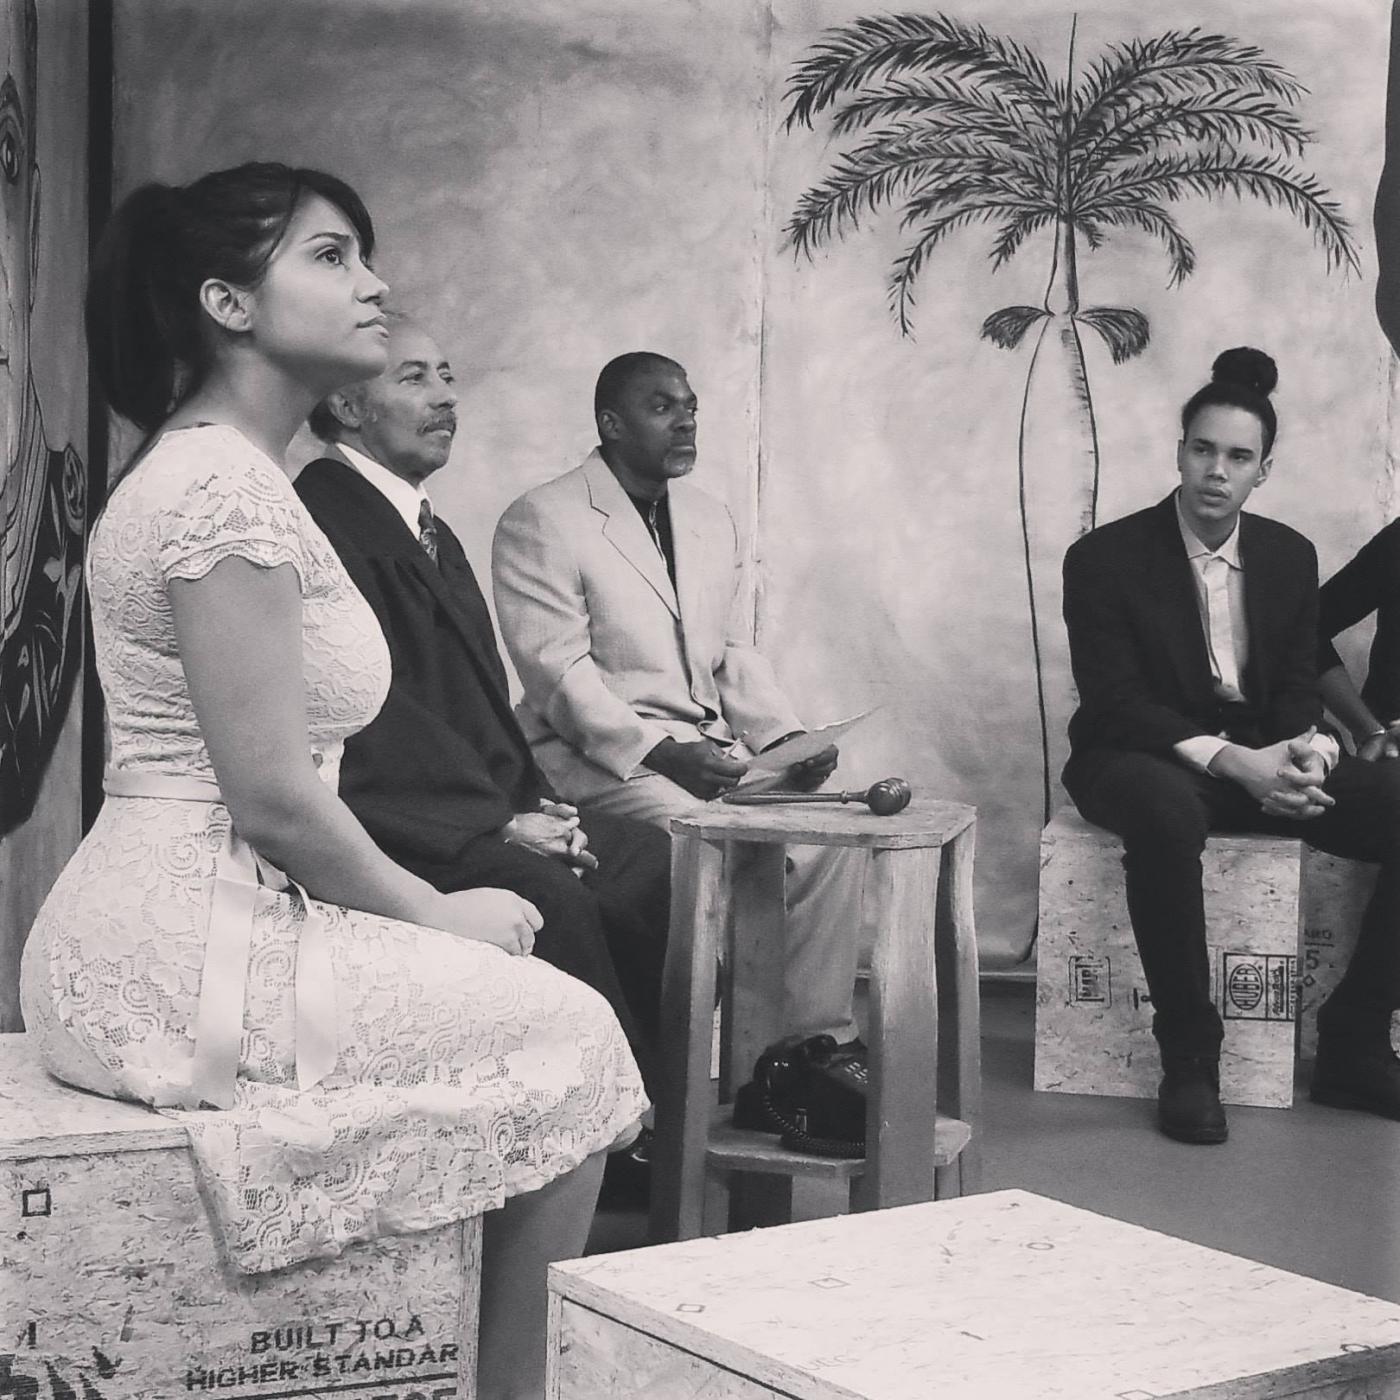 In black and white, a group of people sit in a lobby with a painted palm tree on the wall.